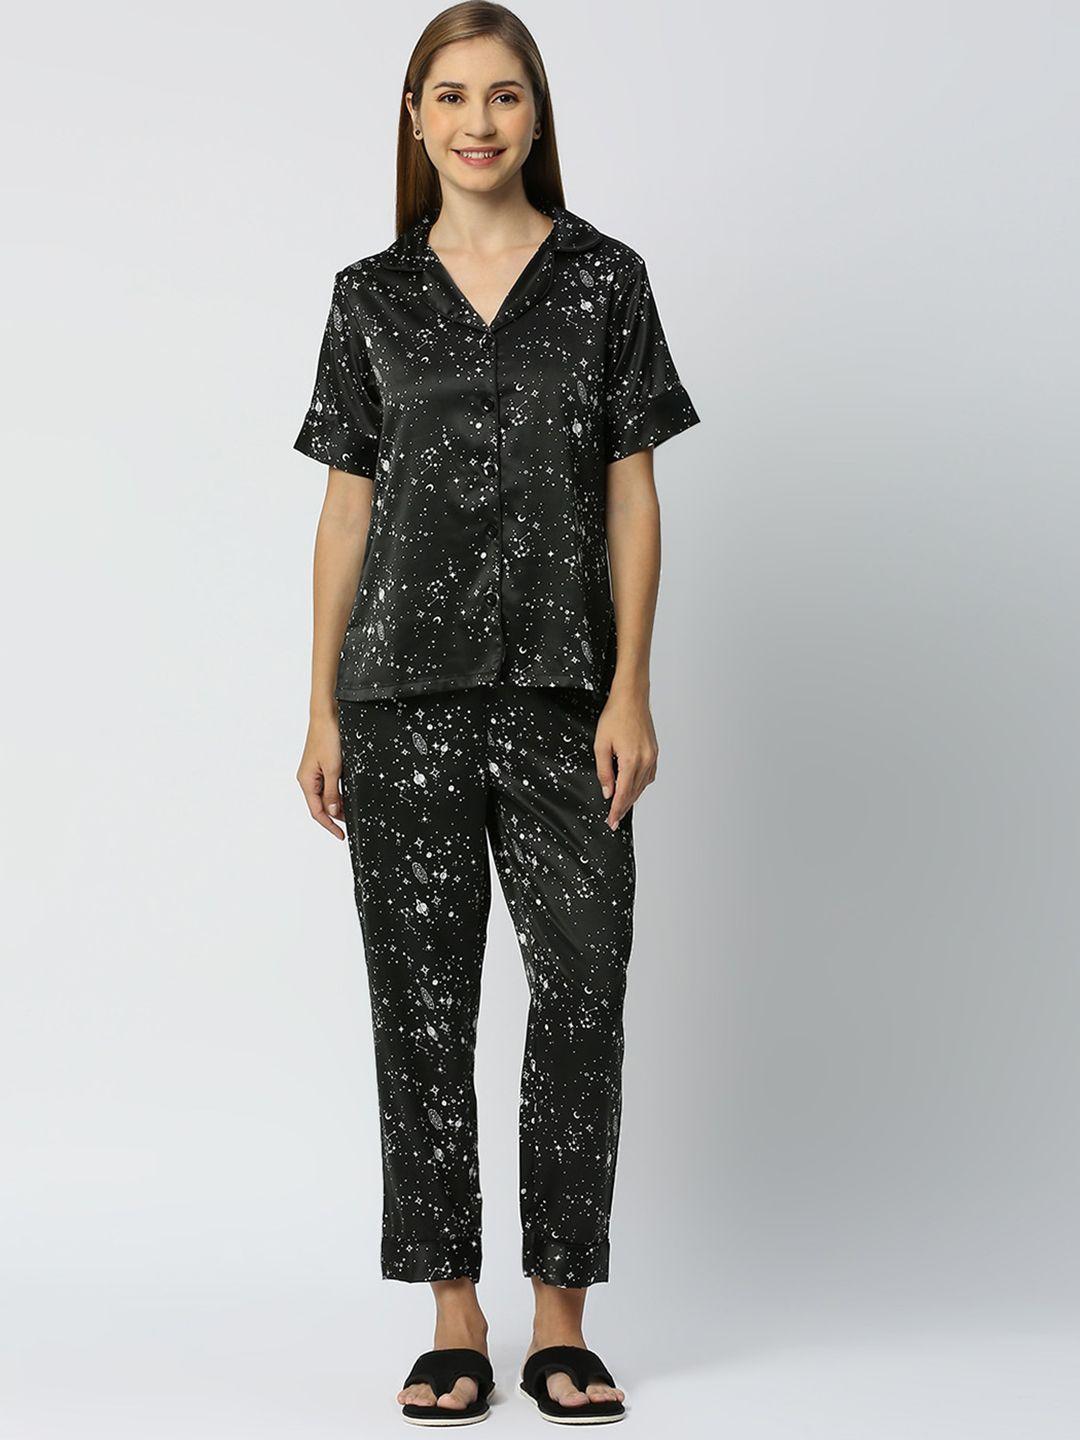 smarty pants conversational printed night suit